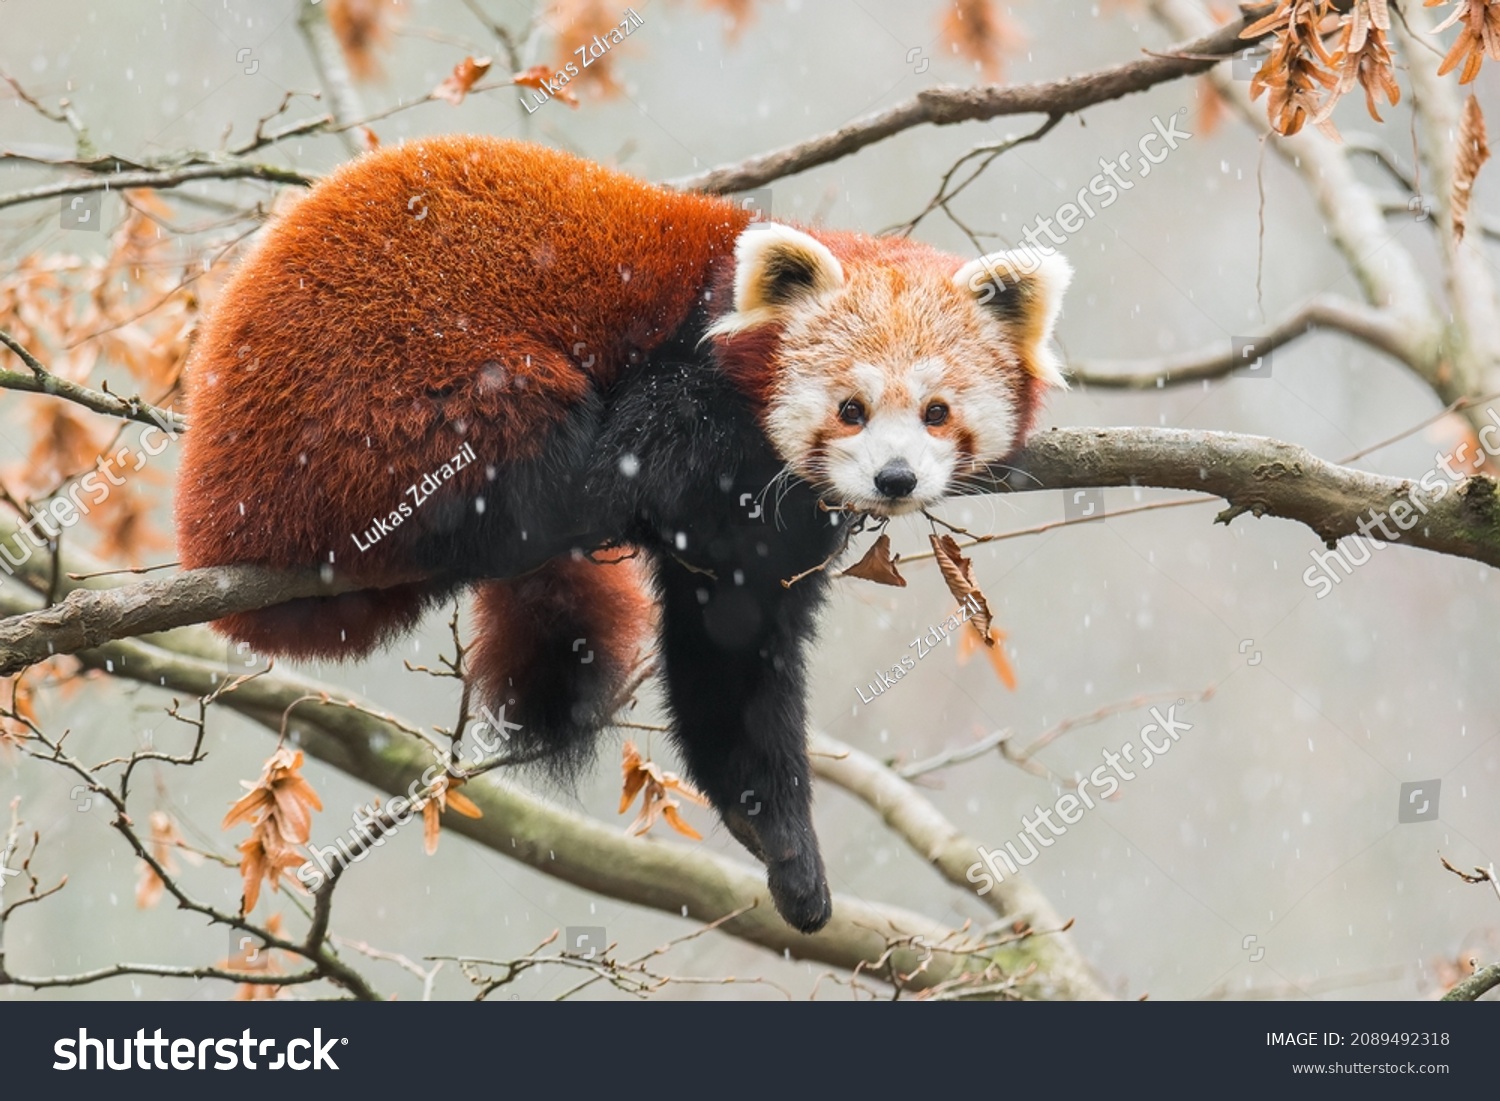 Red panda (Ailurus fulgens) sitting on a tree in snow. Beautiful brown and orange furry mammal in its environment with soft background. Wildlife scene from nature.  #2089492318